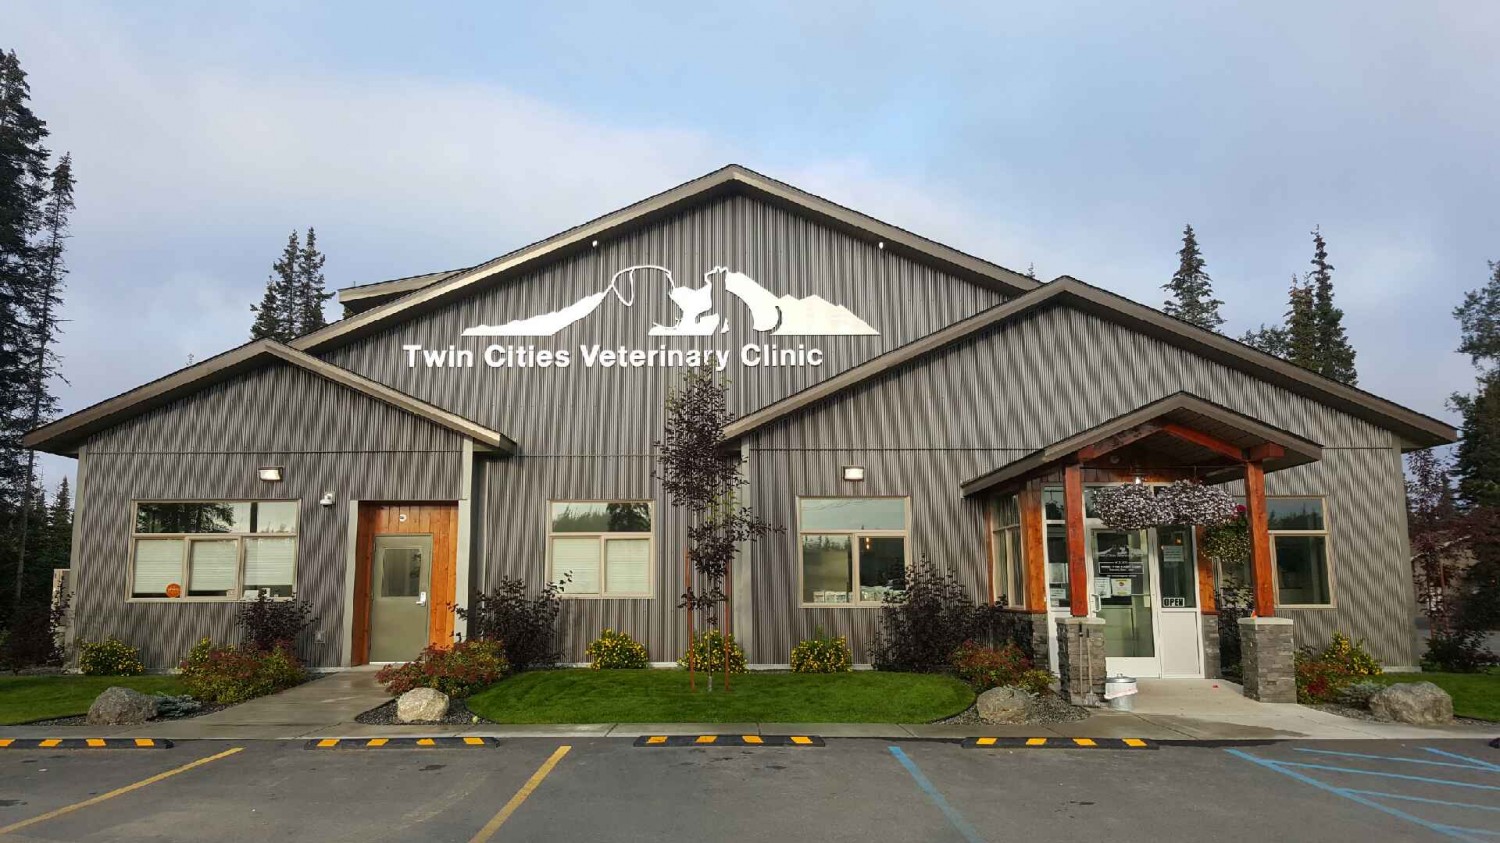 Twin Cities Veterinary Clinic - Soldotna, AK - Home